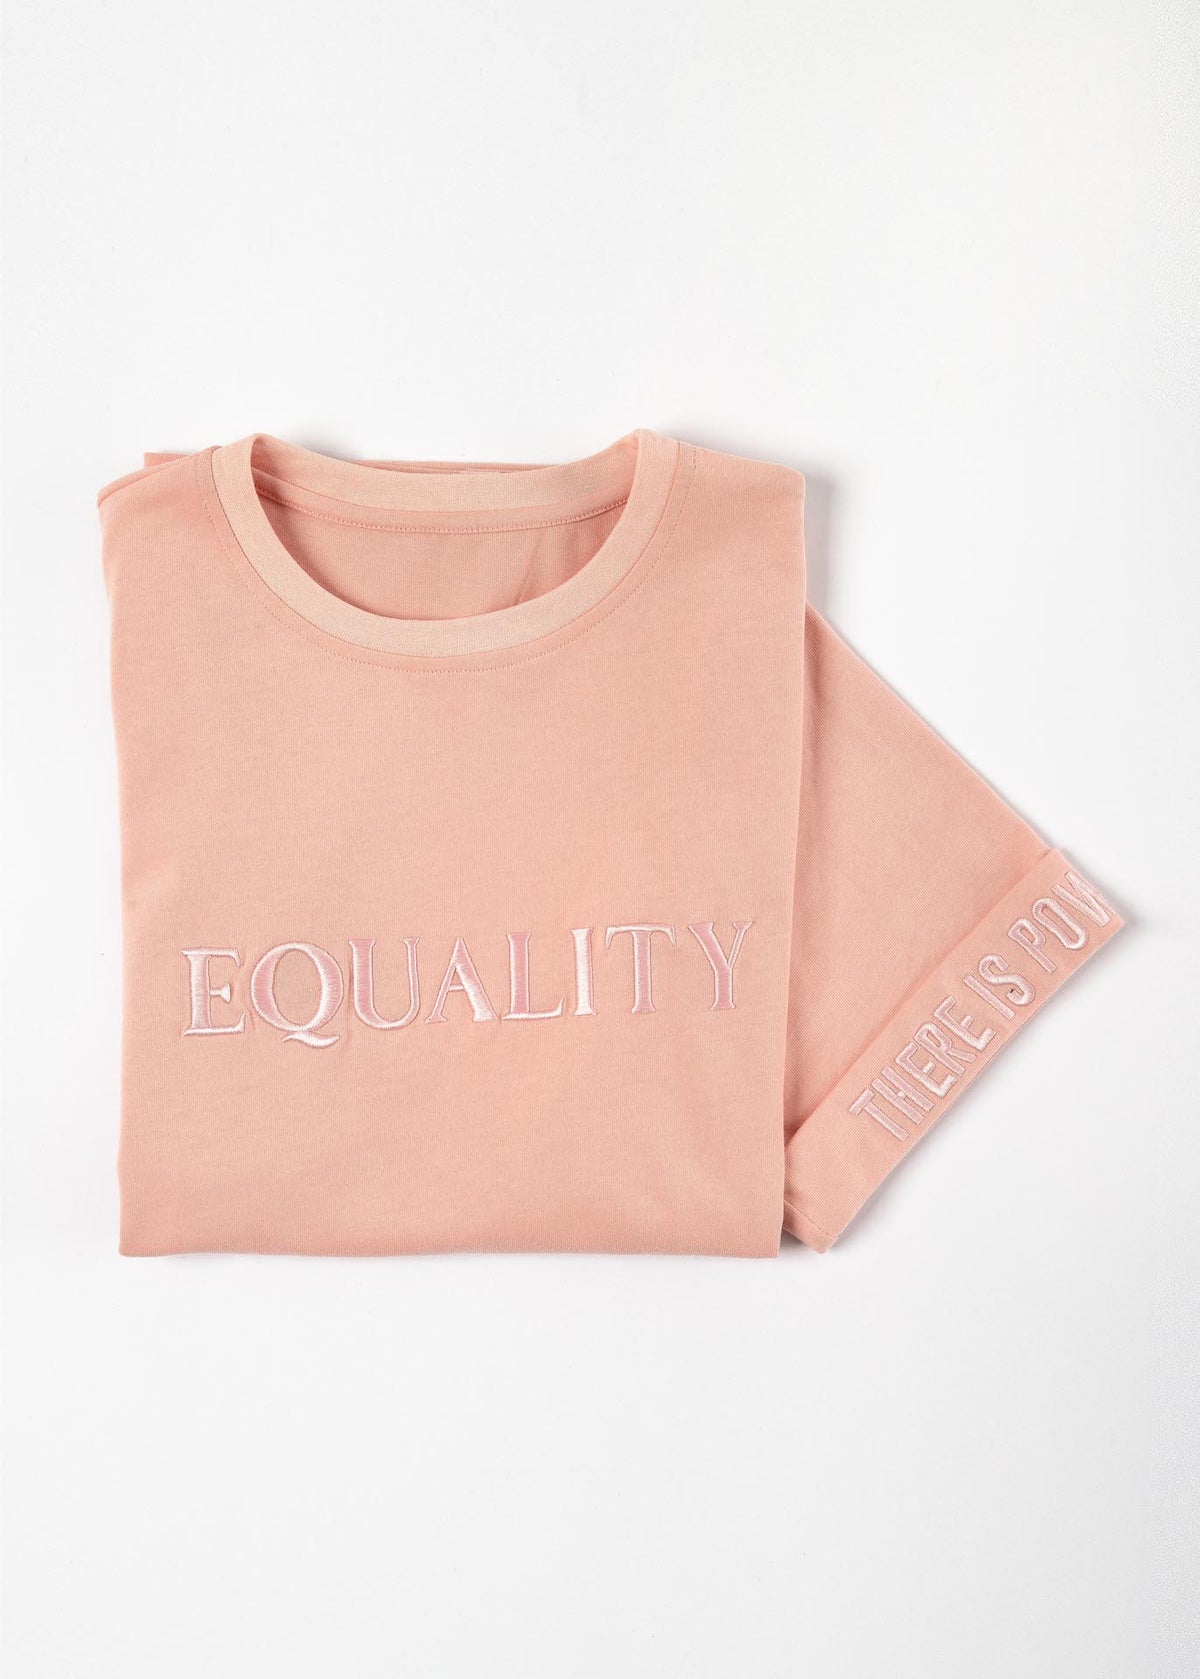 Equality Embroidered T-Shirt